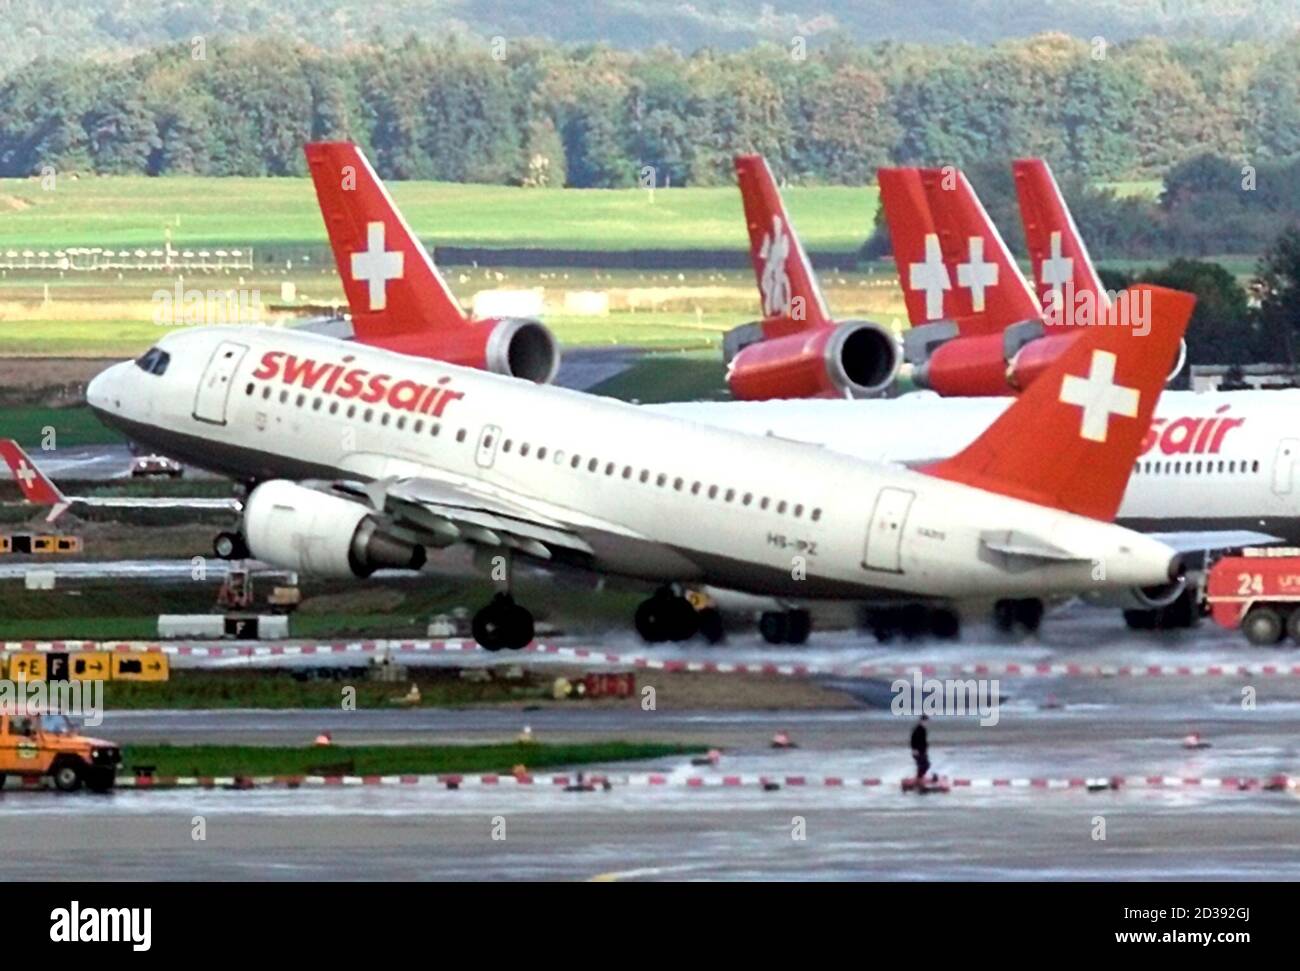 A Swissair plane takes off from Zurich airport October 4, 2001 after the  entire fleet of the colllapsed national airline was grounded for two days  due to a severe cash crunch at